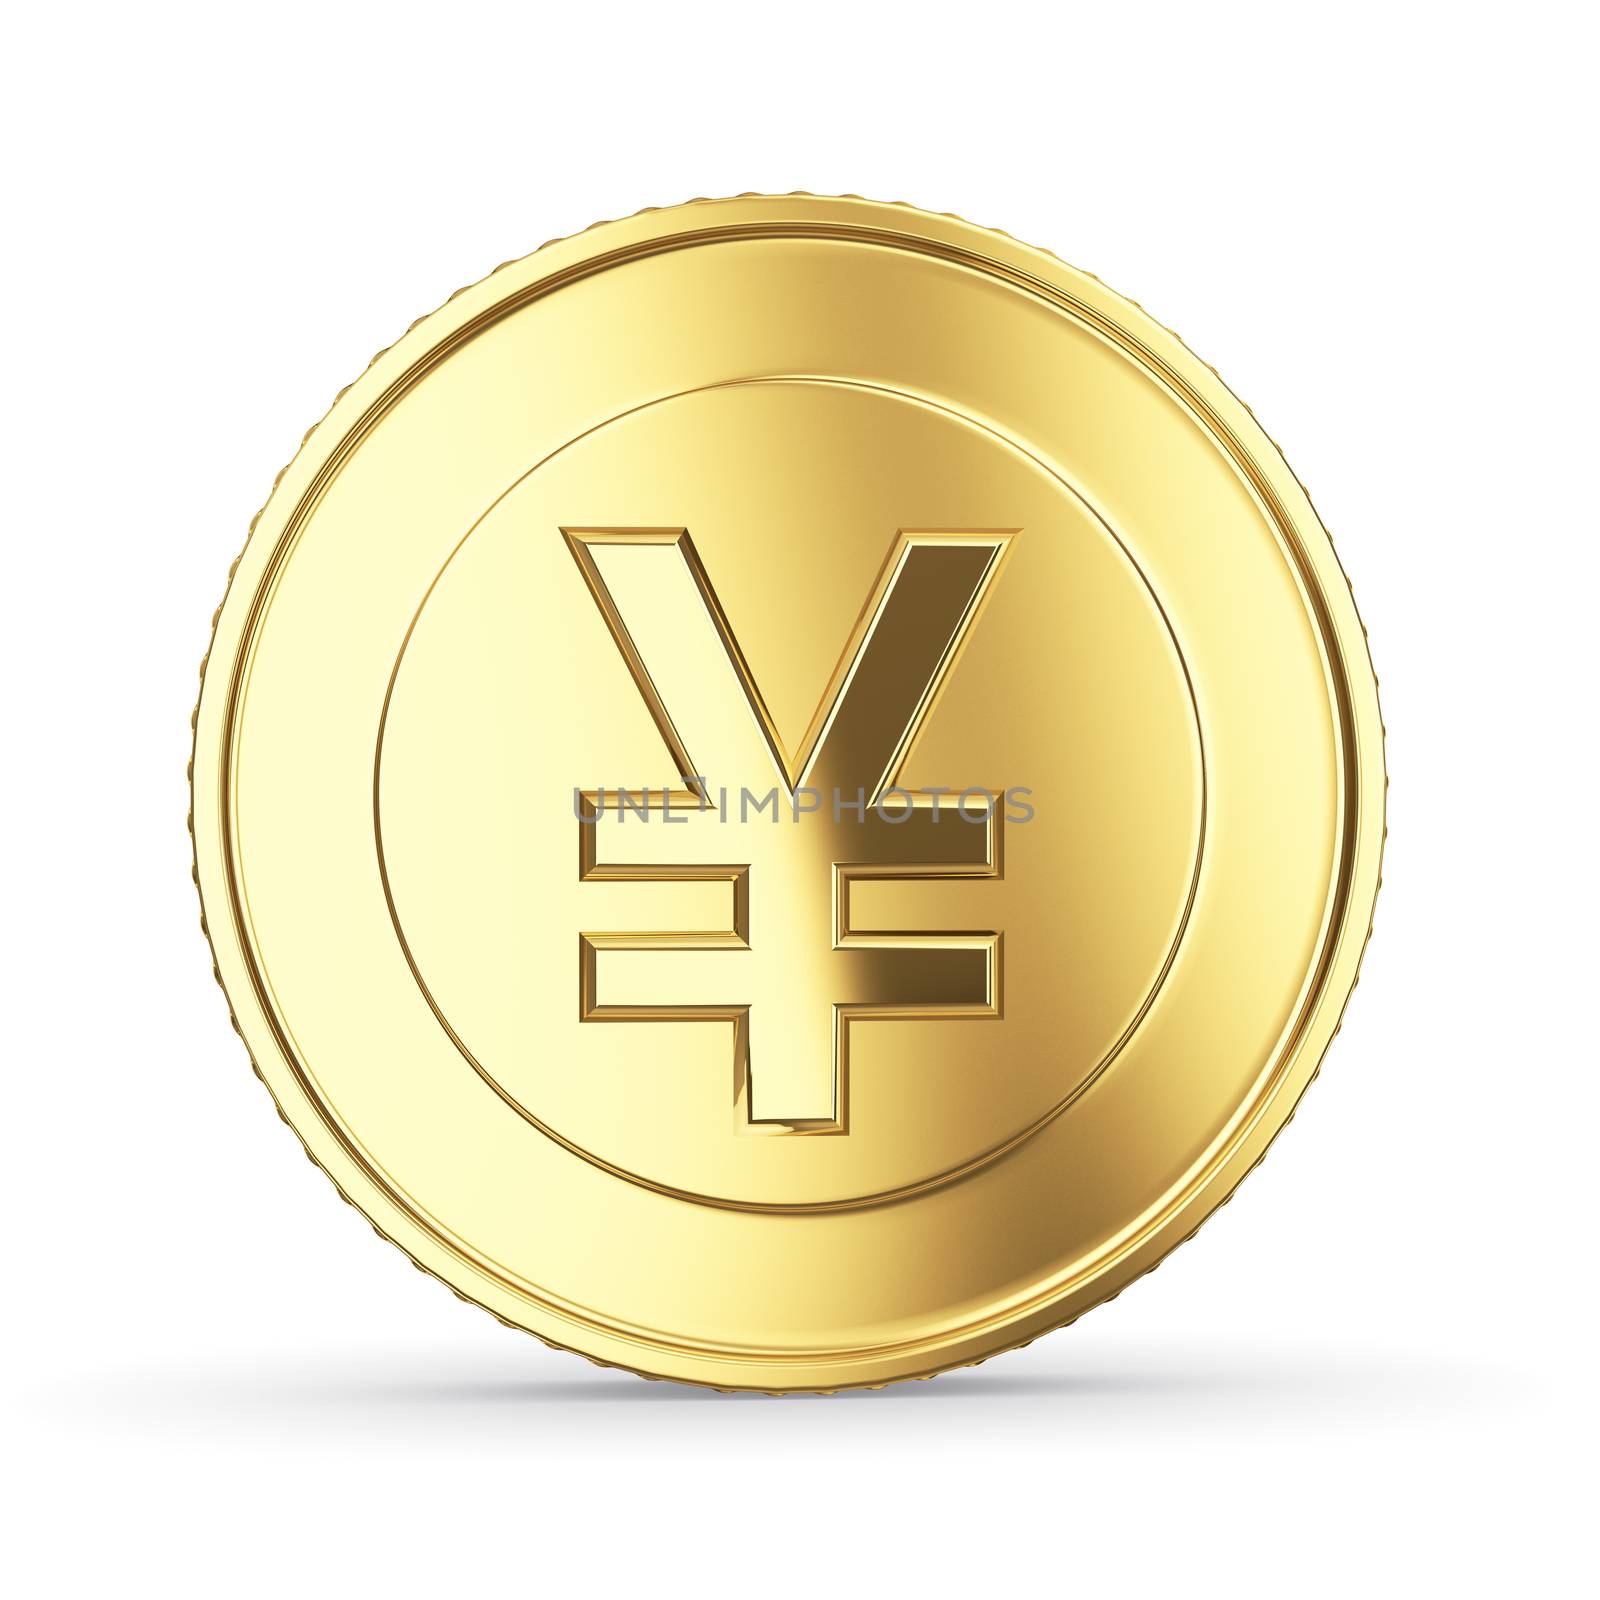 Golden yen coin on white isolated with clipping path